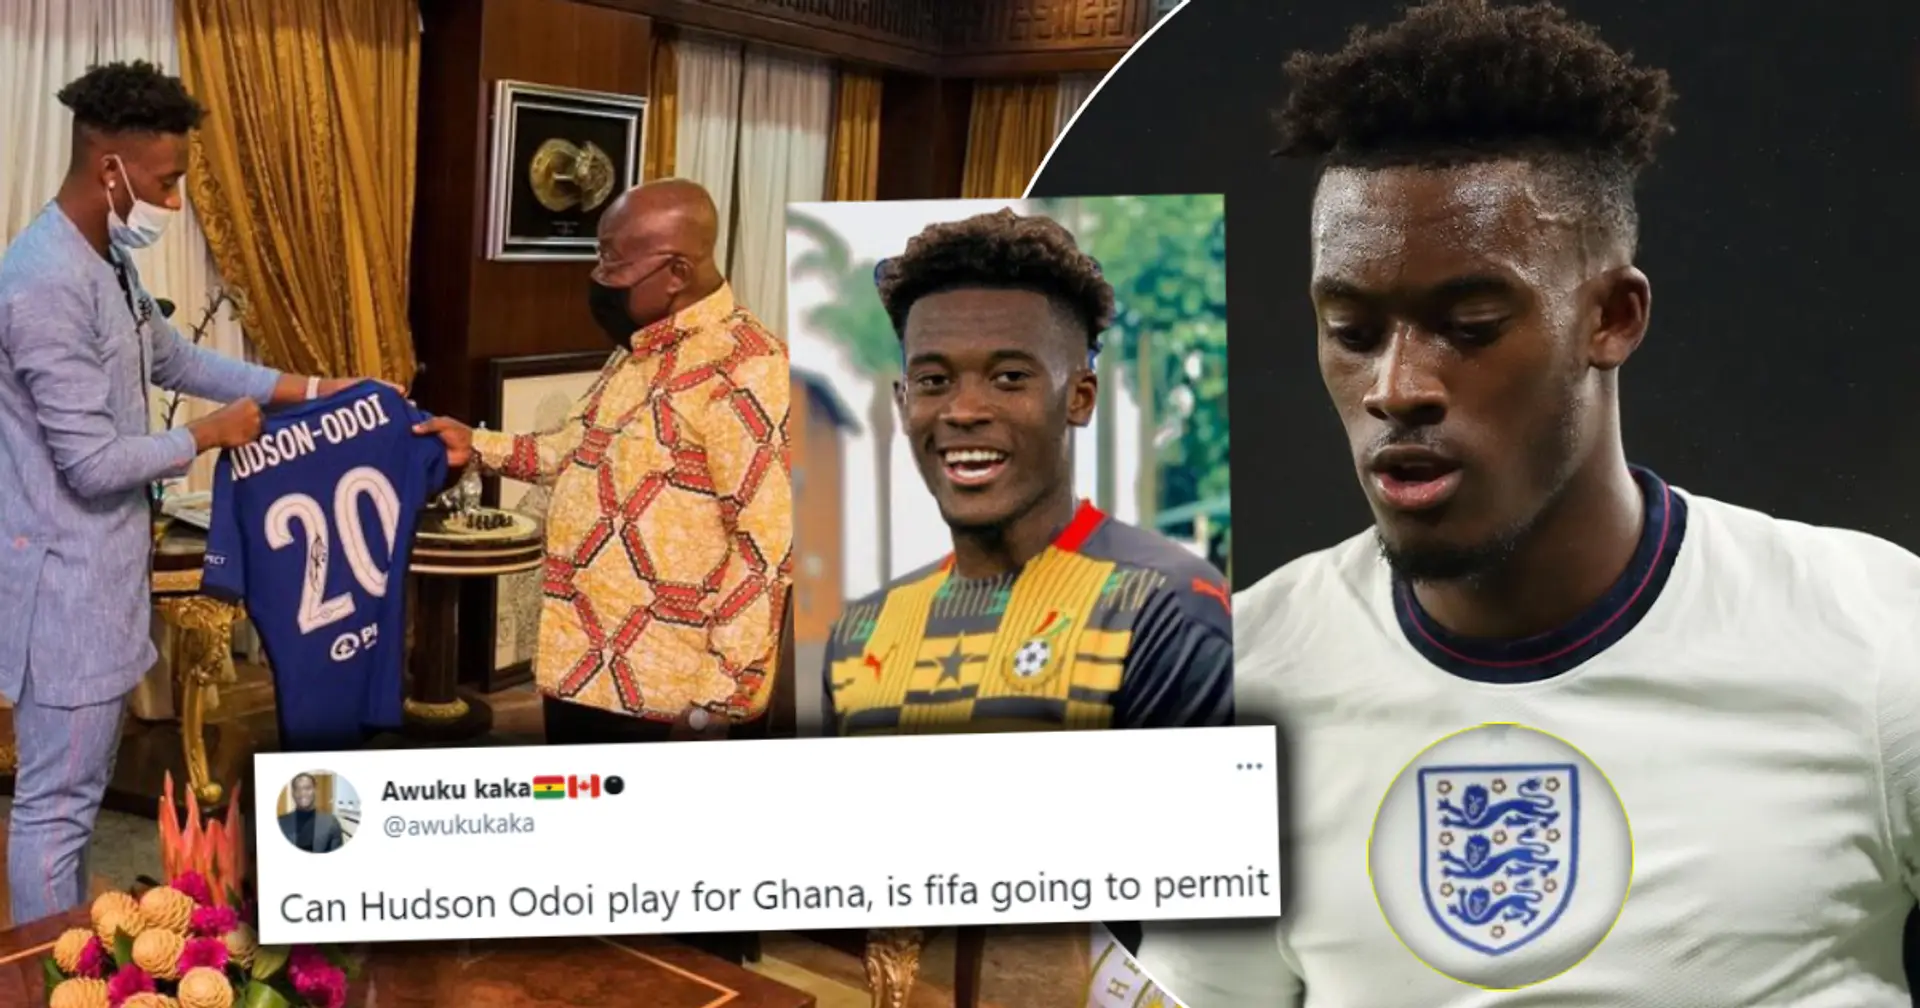 Could Hudson-Odoi switch allegiance to Ghana after 3 England apps? You asked, we answered